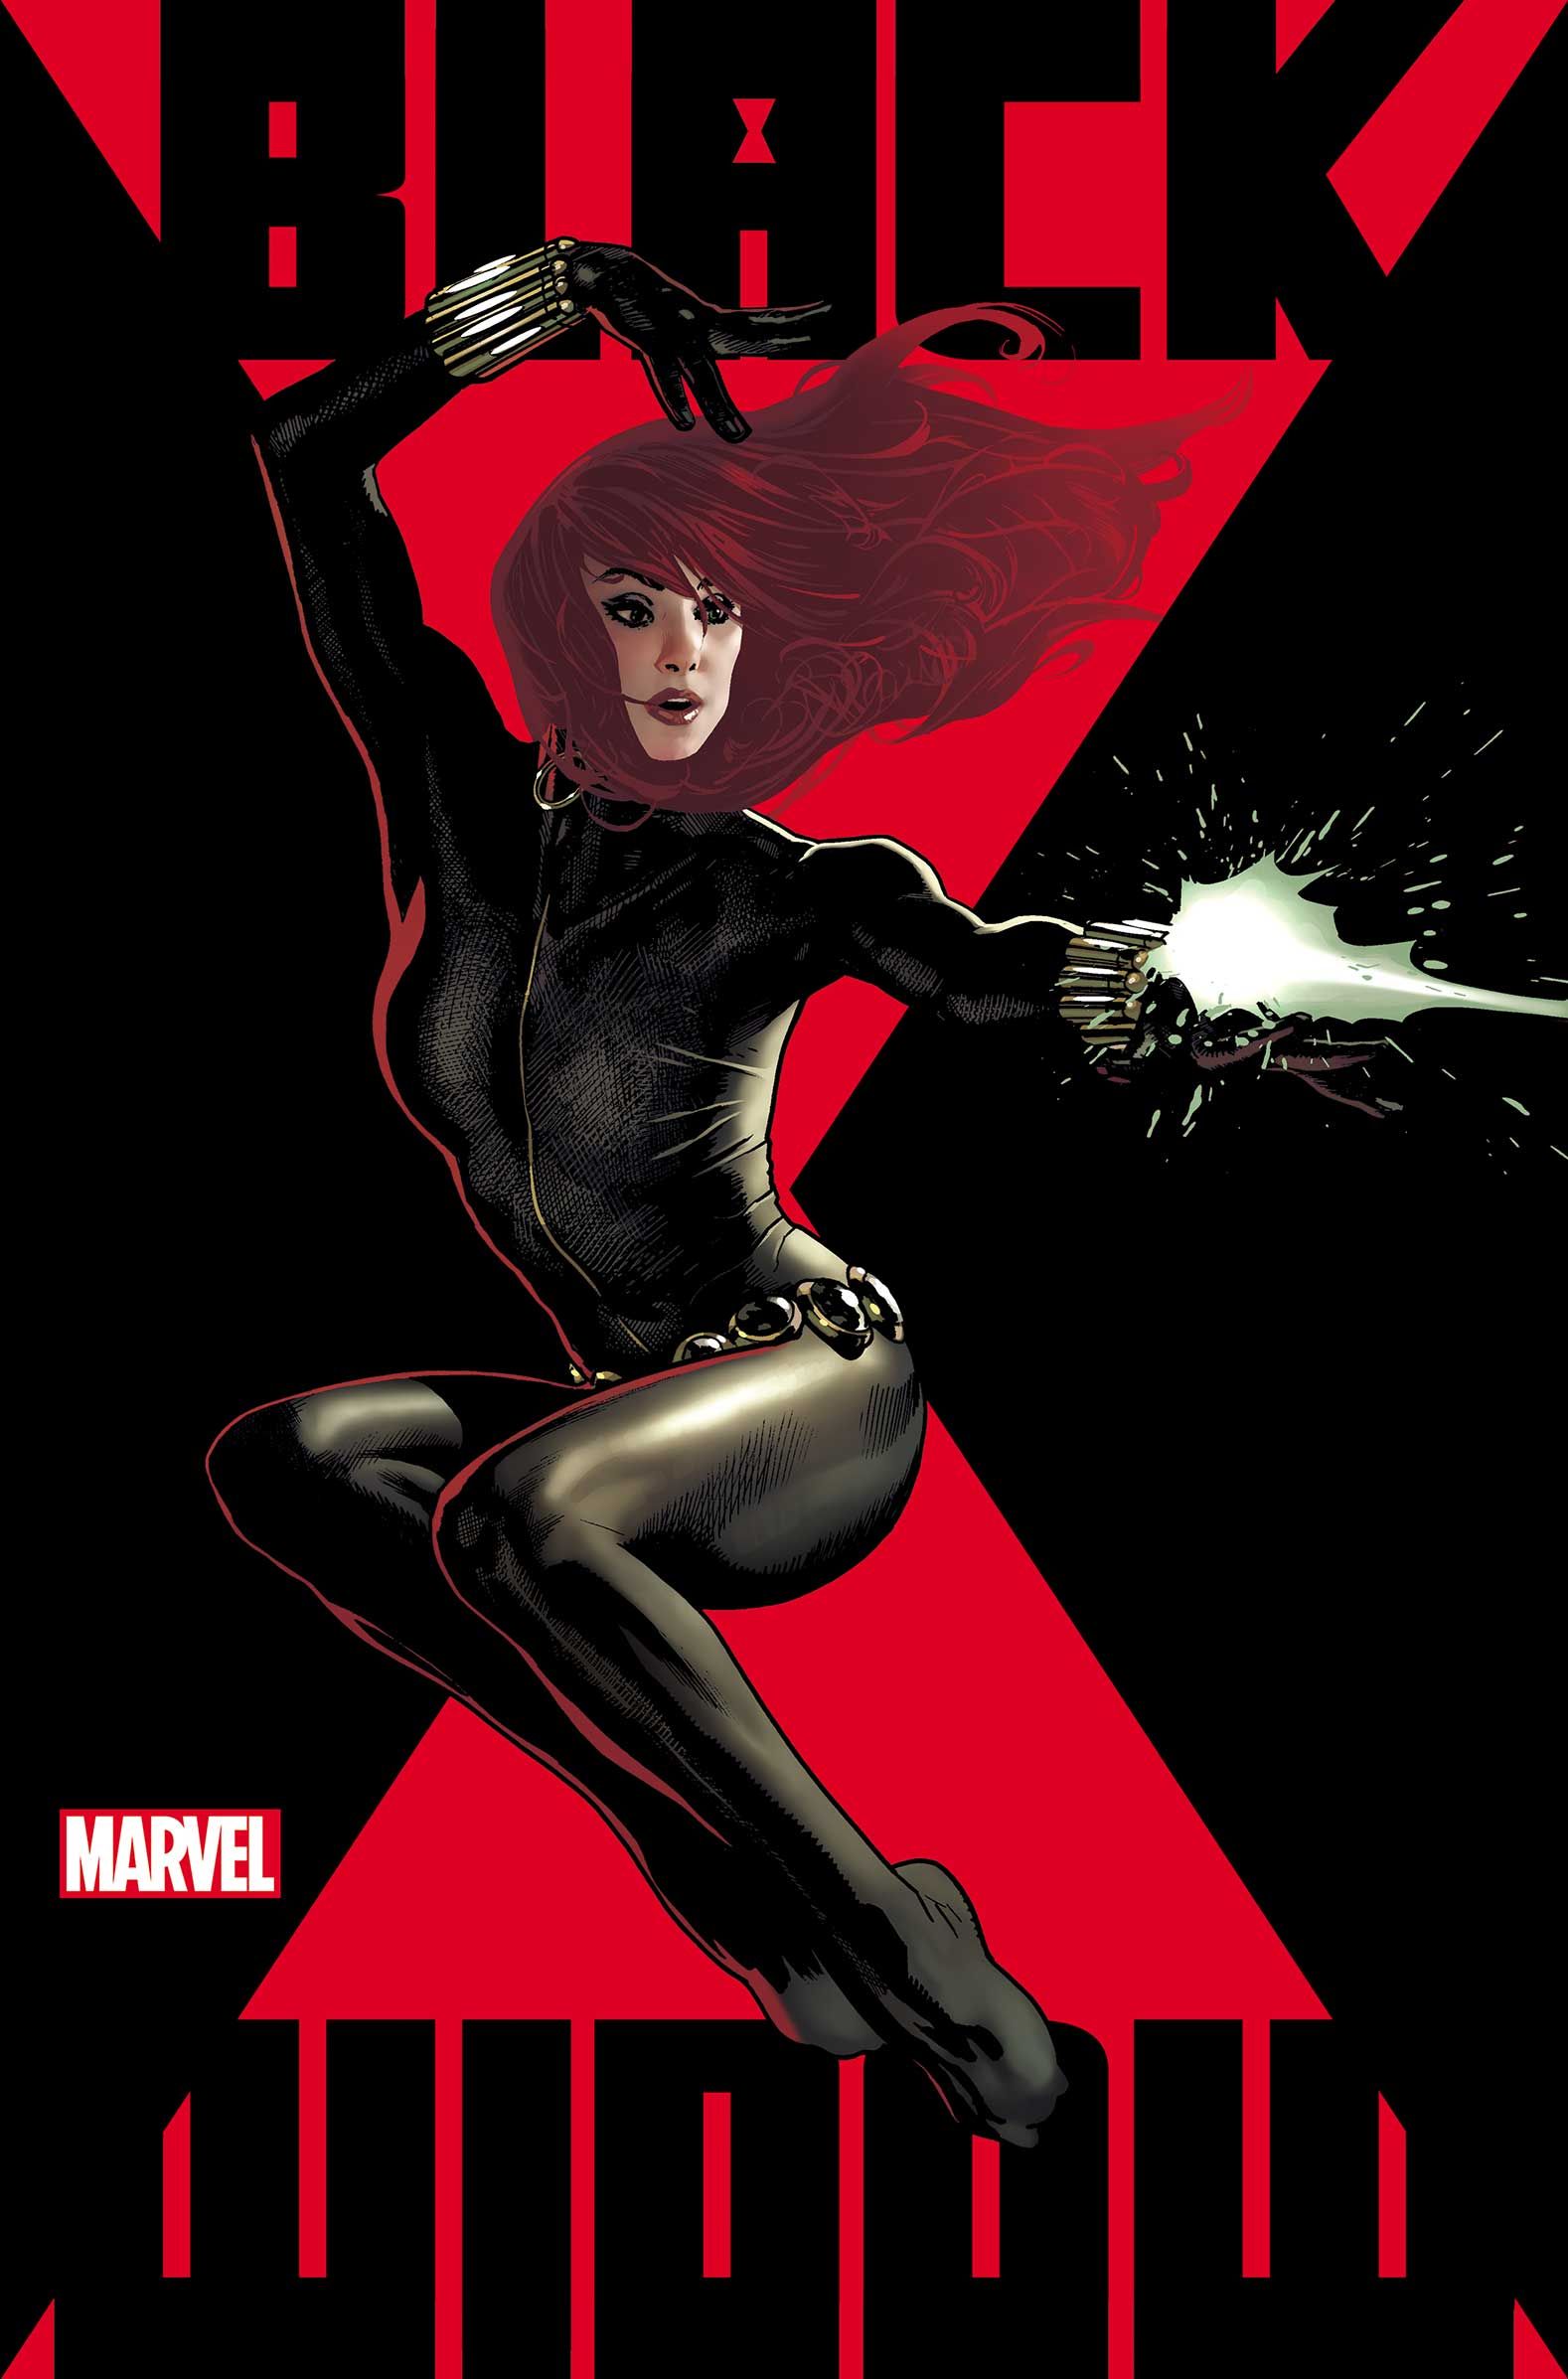 Cover art by Adam Hughes for Black Widow (2020) #1.